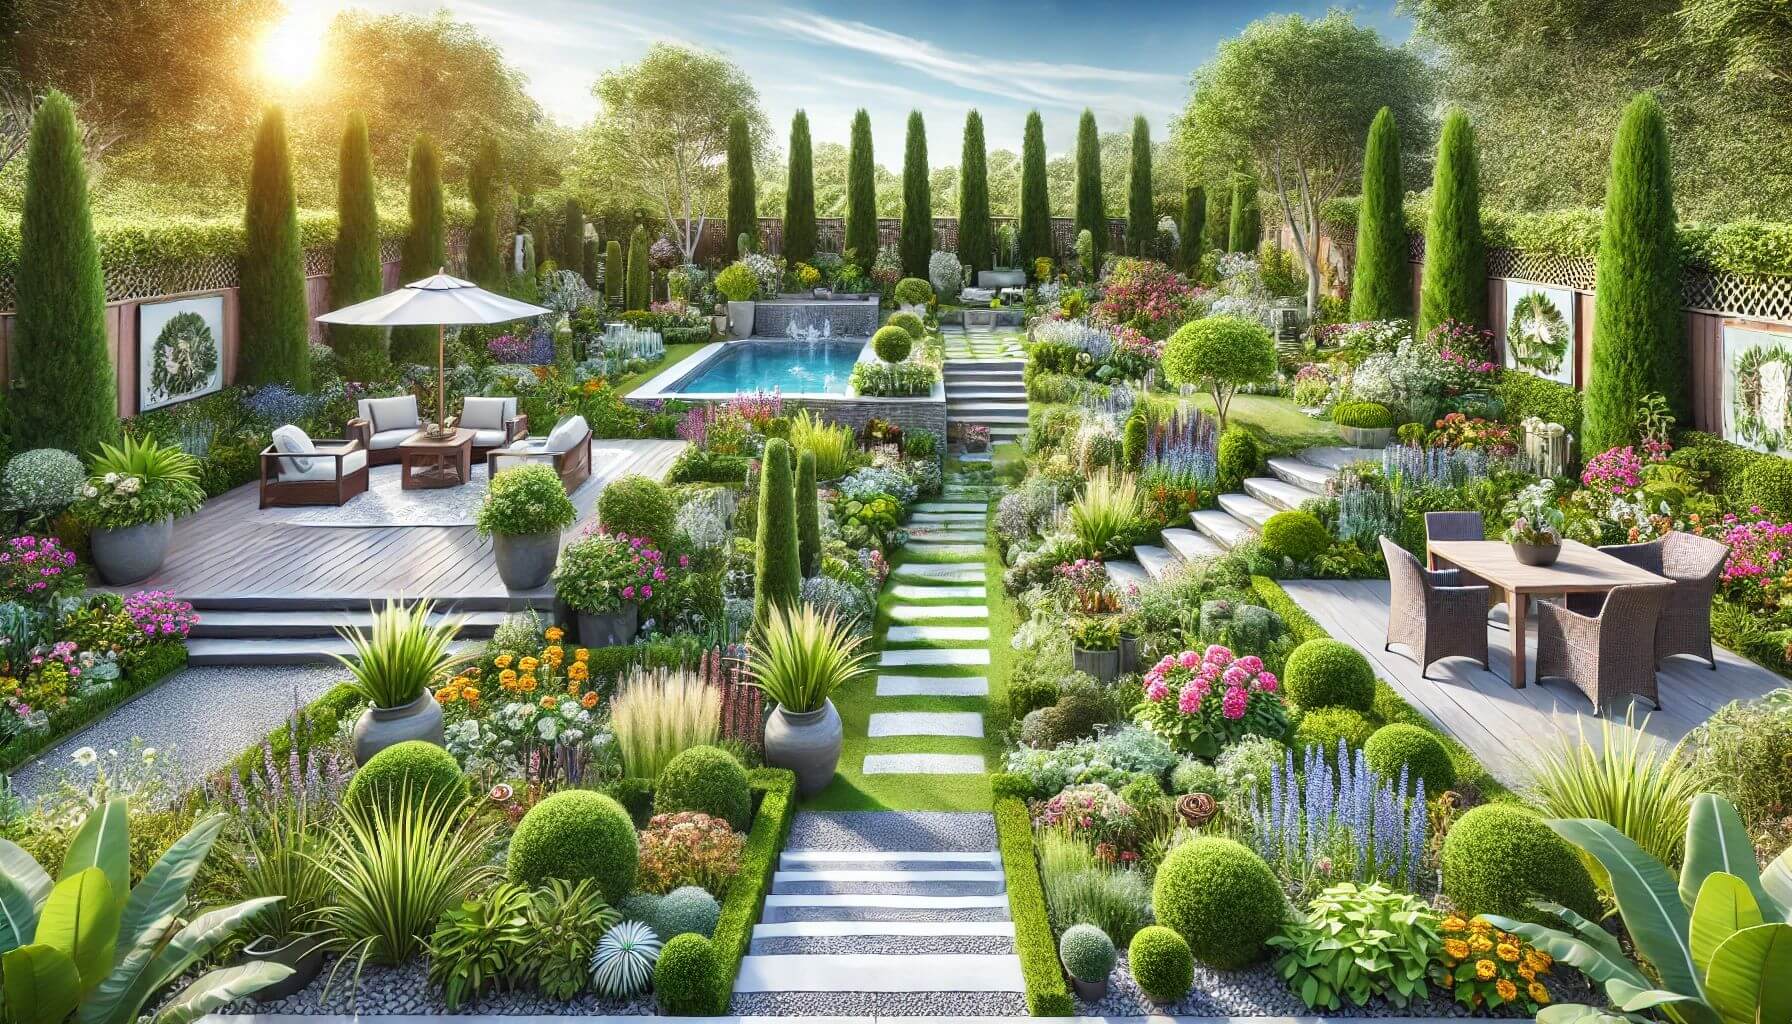 How to Add Style to the Landscape: 17 Stunning Garden Design Ideas